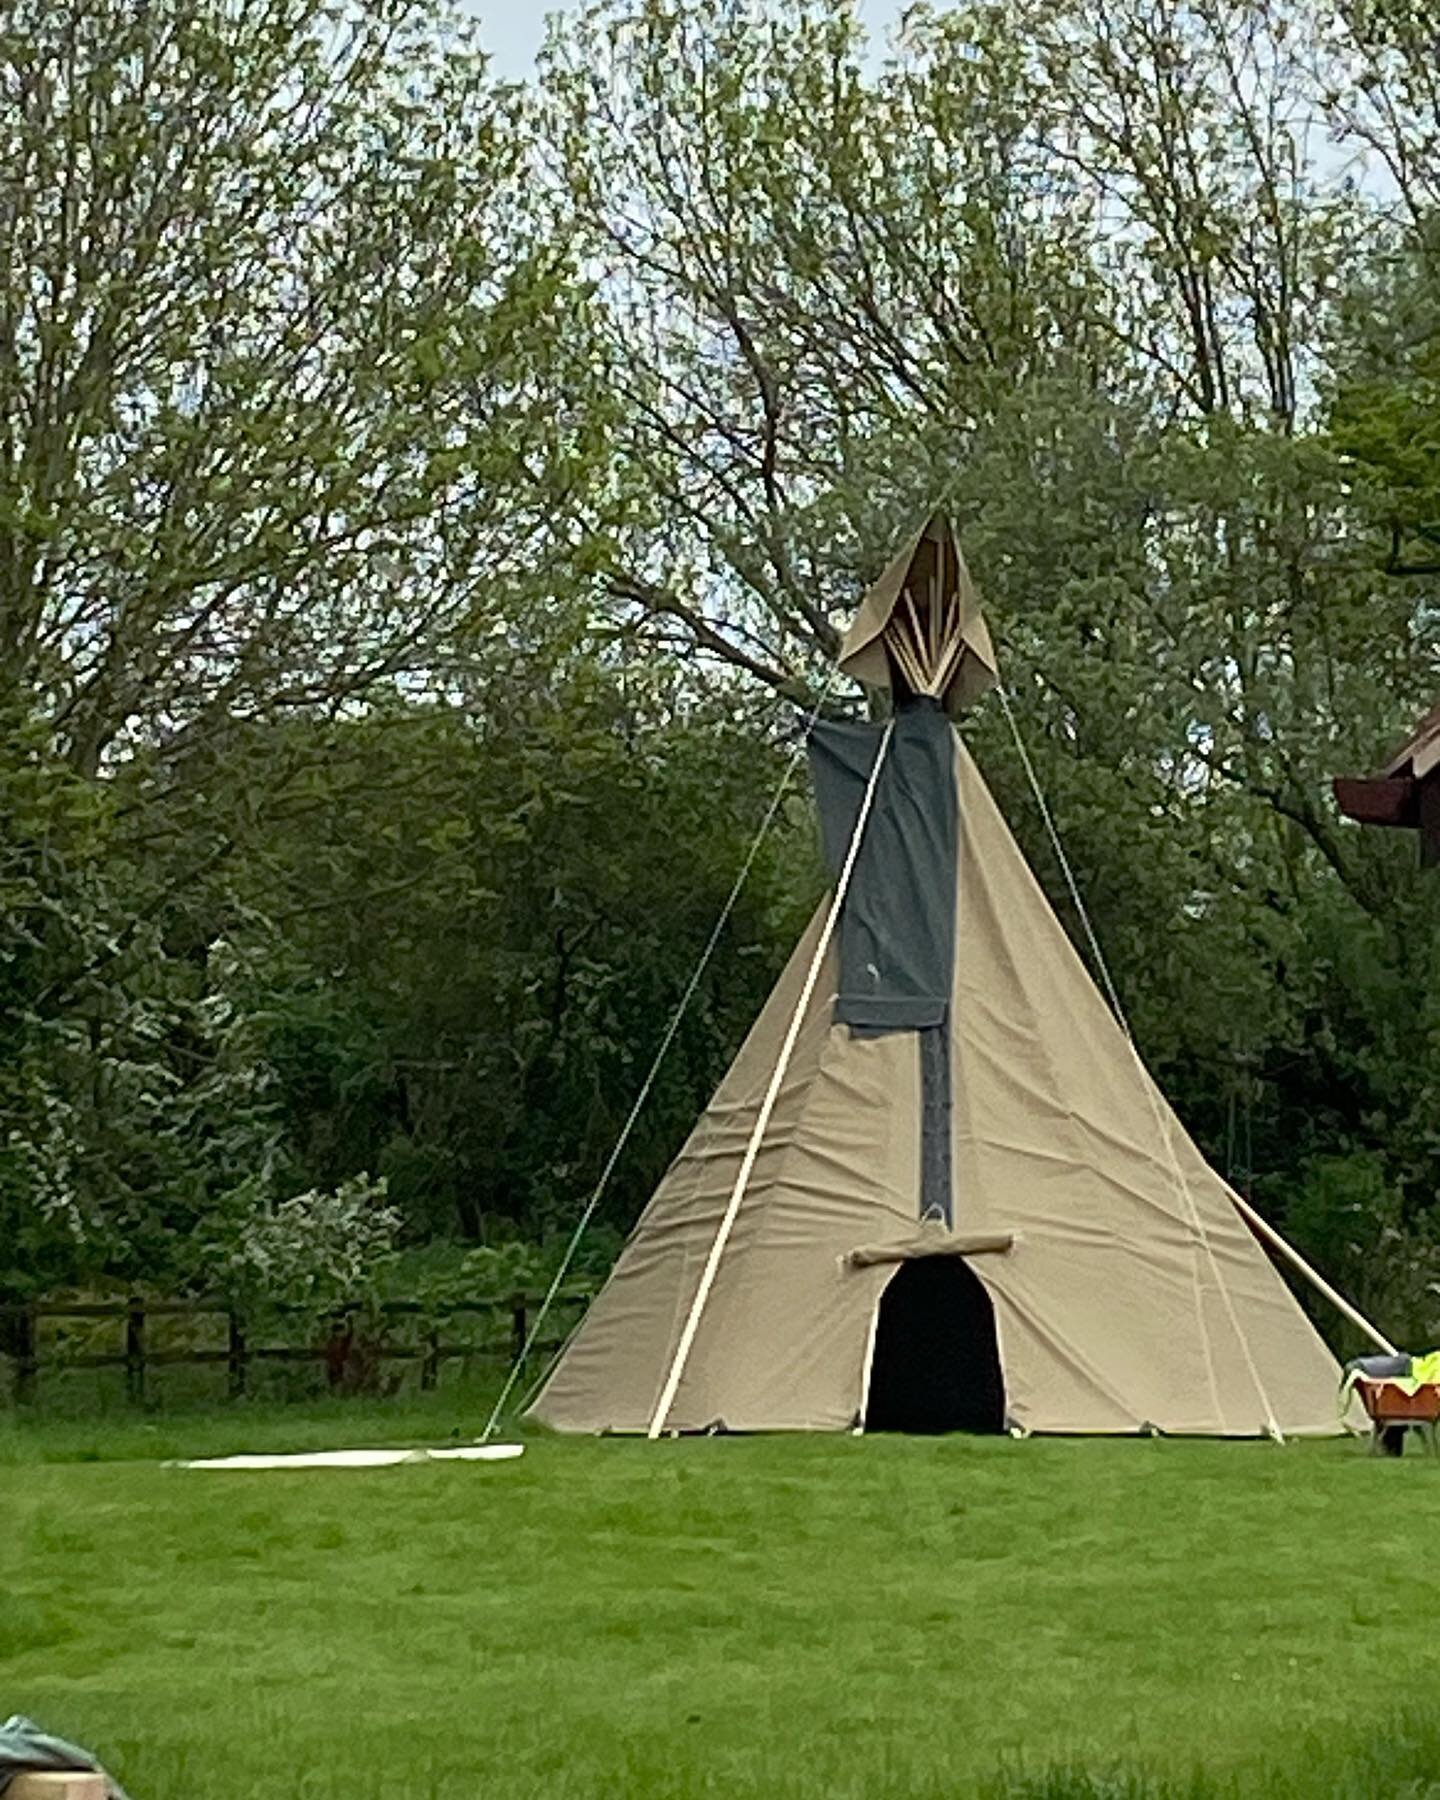 Perfect weather for a tipi set up, this lovely 21ft tipi is with her new humans and looking lovely 🥰 #mytipi #retreatspace #gardenroom #gardendesign #tipi #canopyandstars #glamping